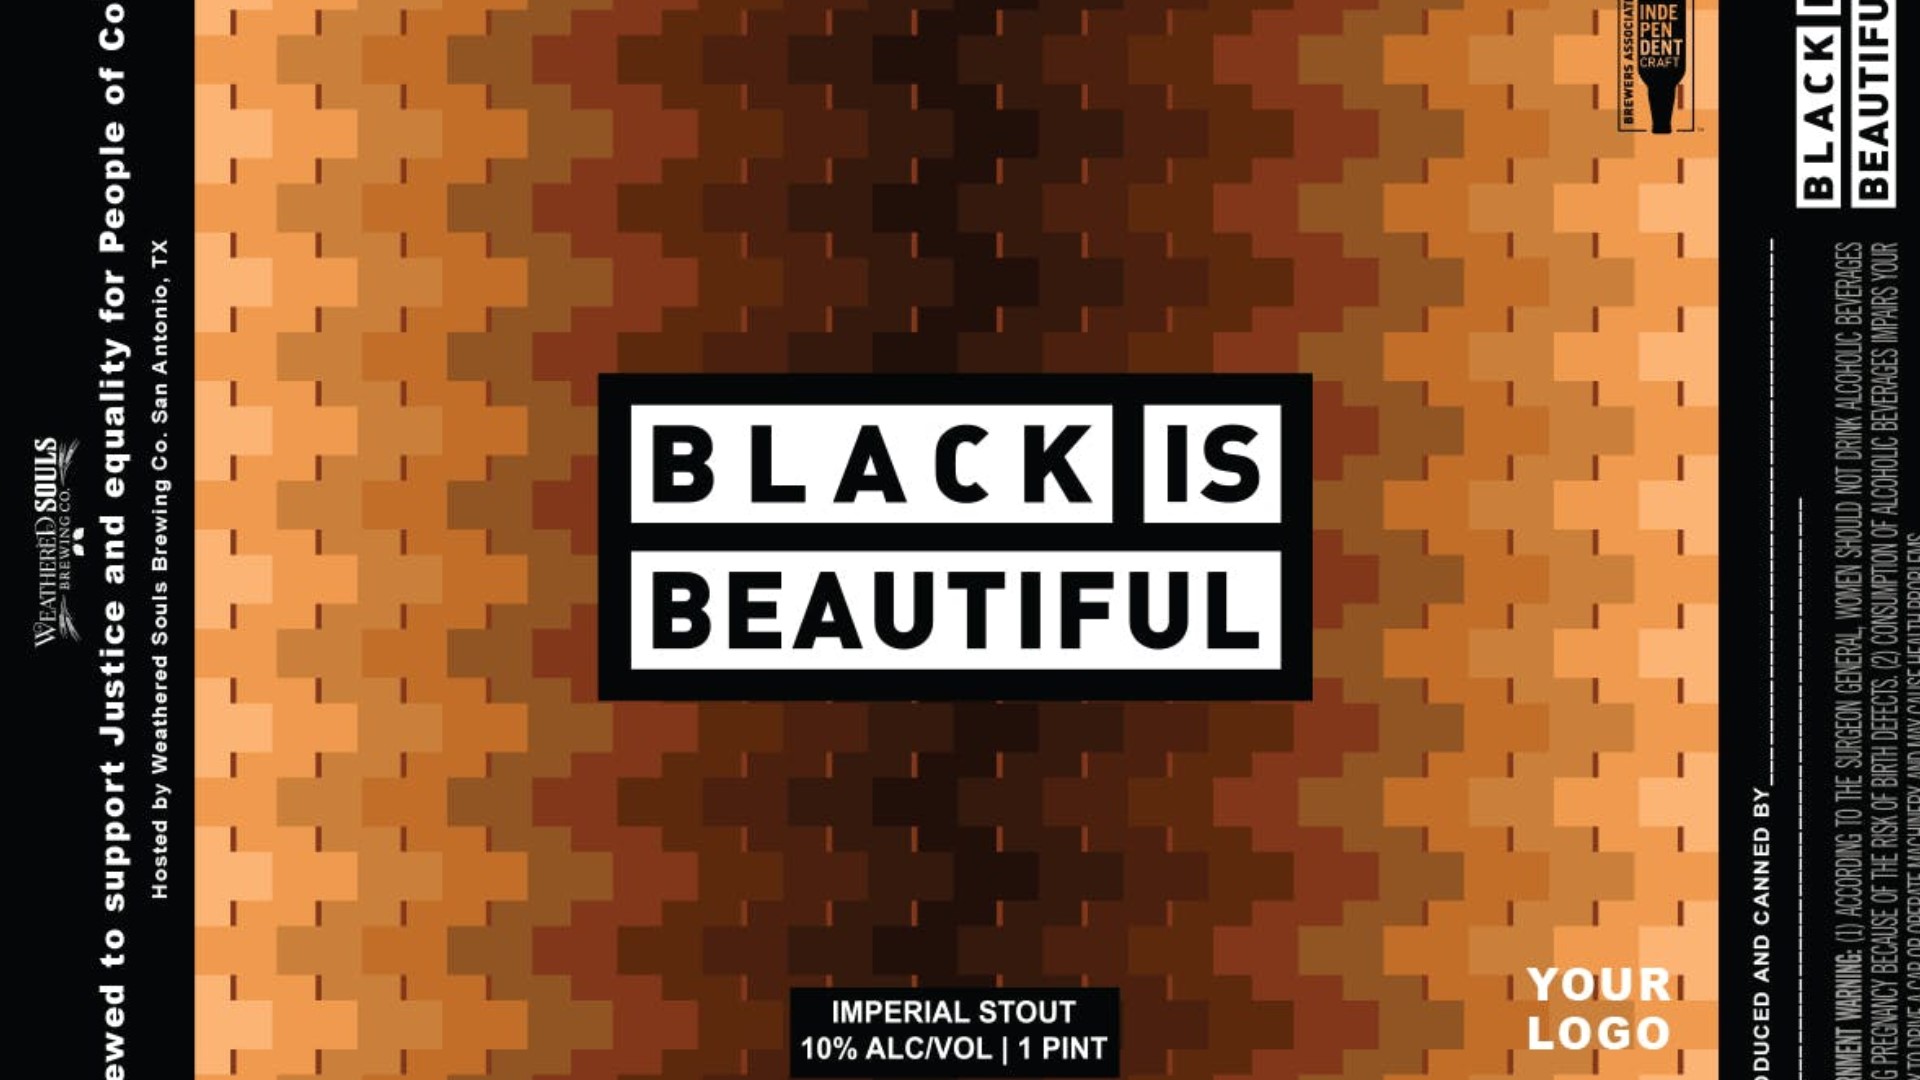 The stout is made in-house, has an ABV of around 9 percent, and it's called 'Black is Beautiful.' It's part of a worldwide campaign started by a Texas brewery.